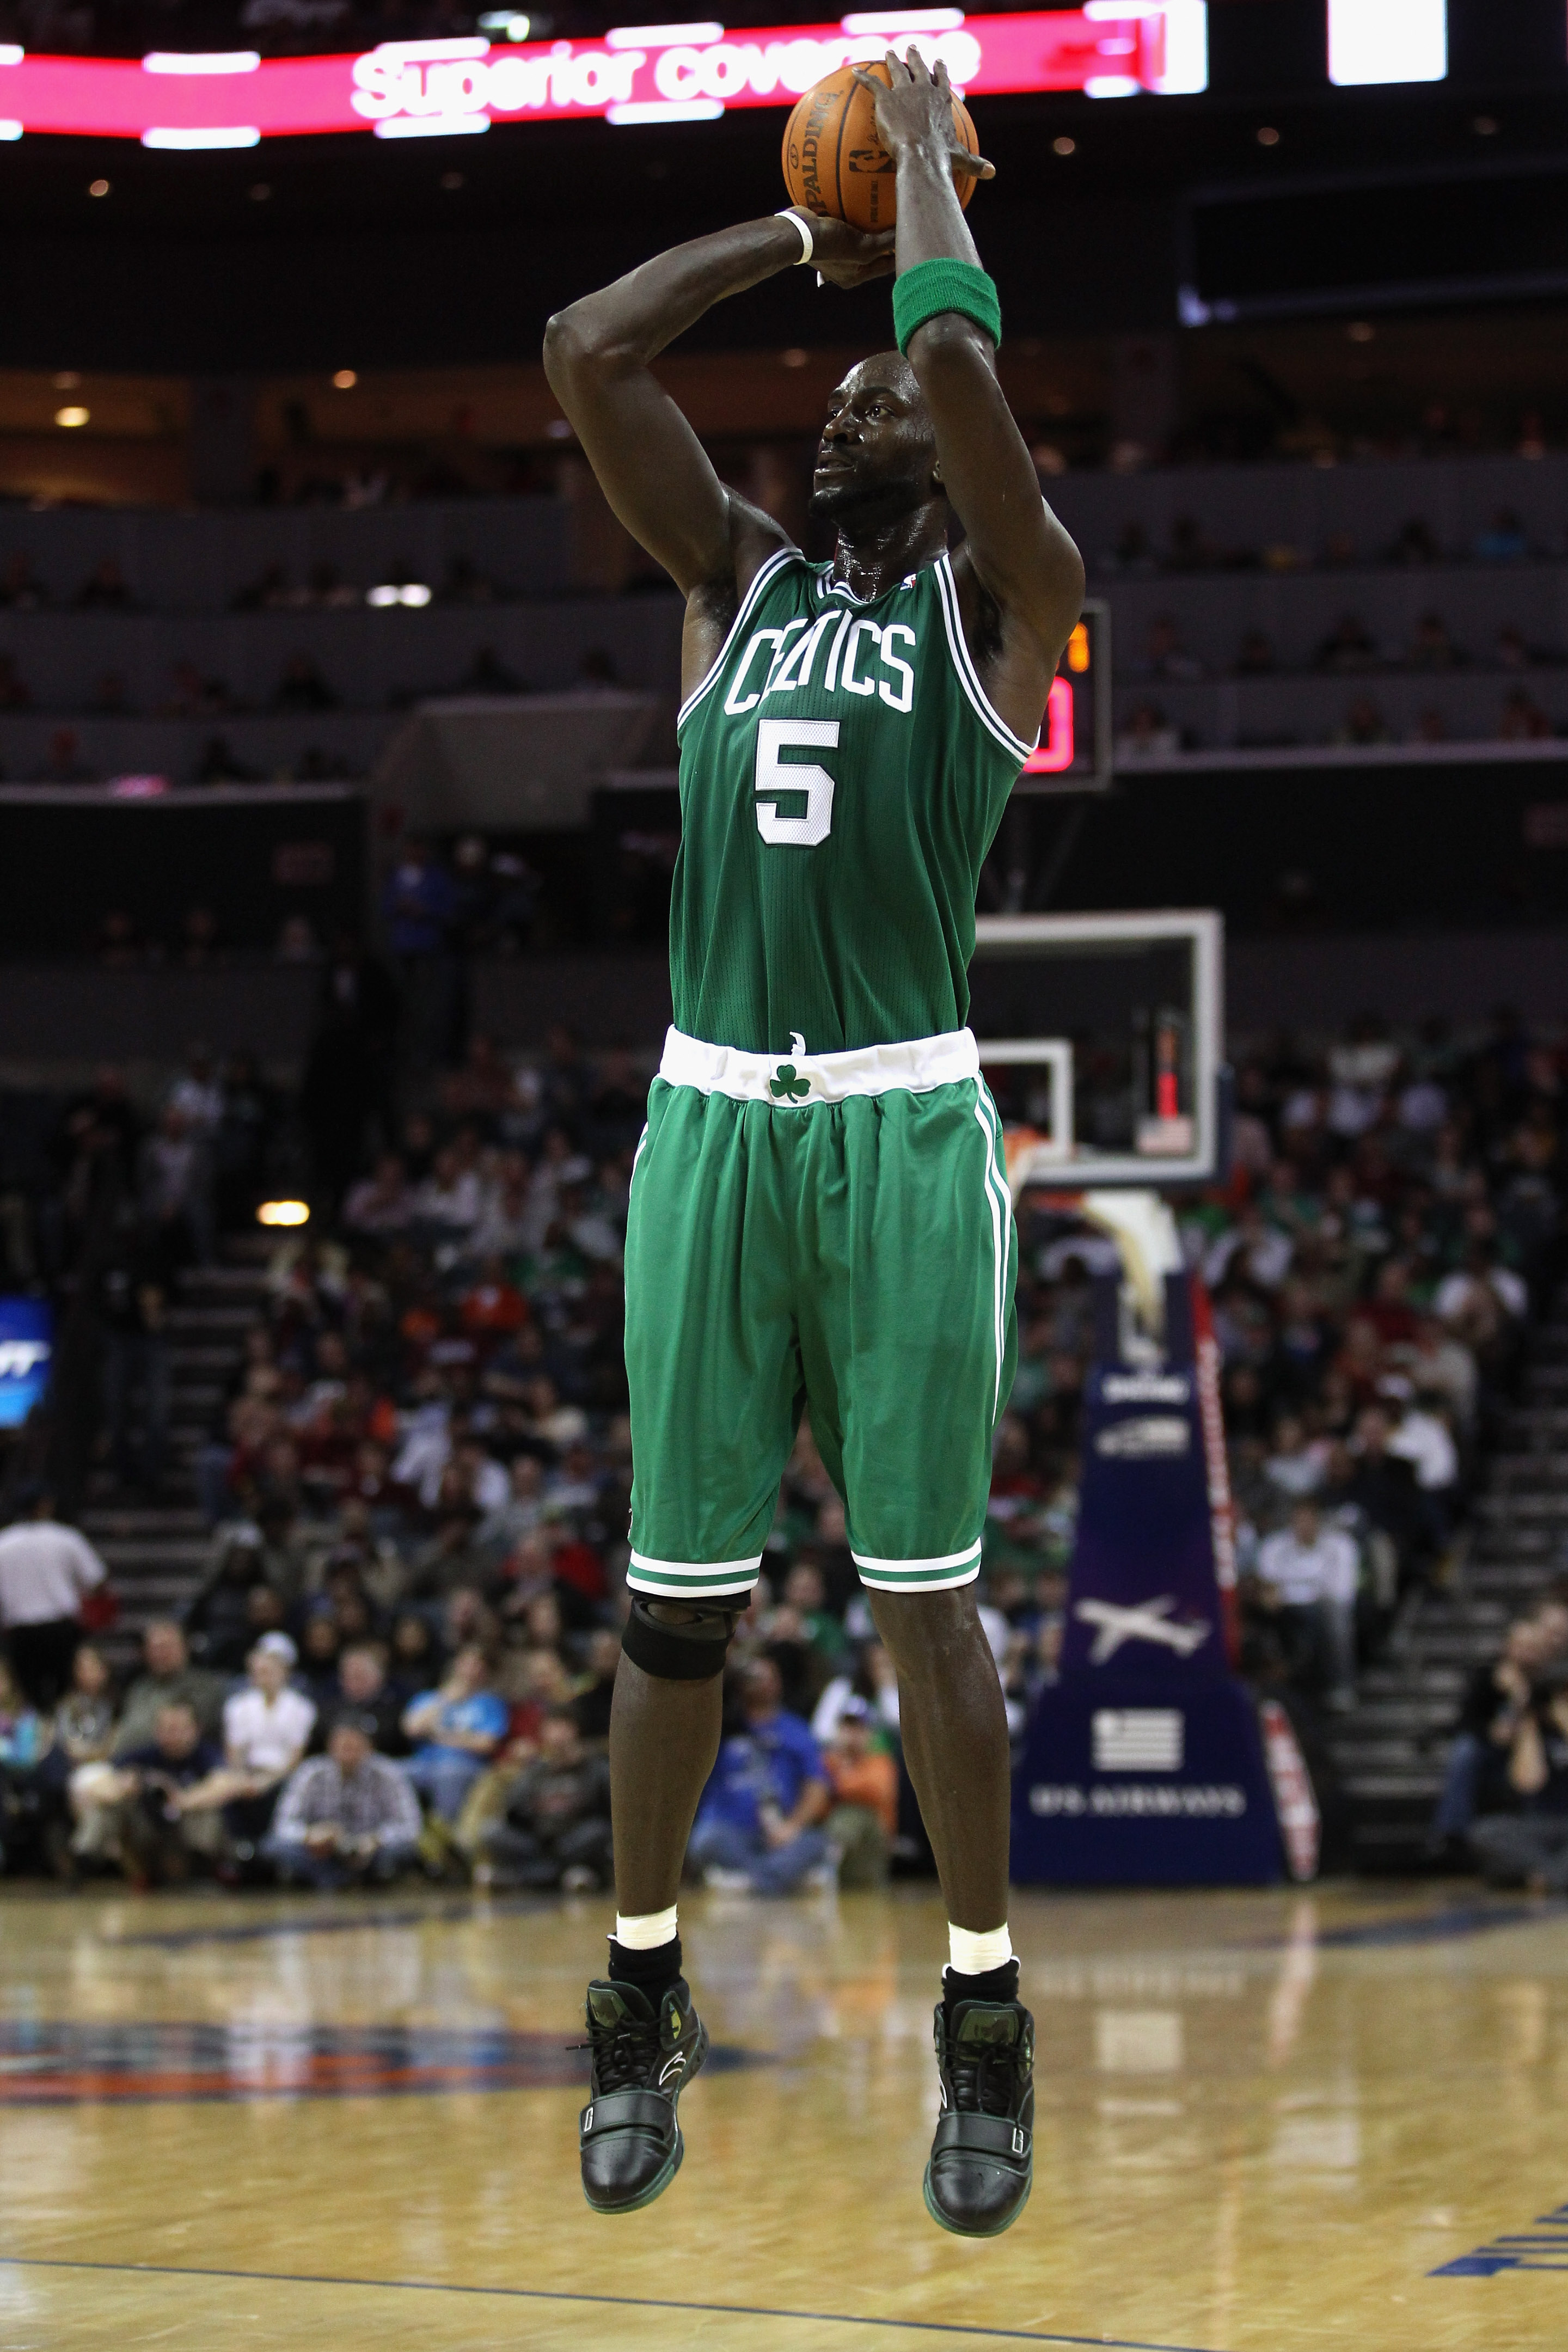 CHARLOTTE, NC - DECEMBER 11:  Kevin Garnett #5 of the Boston Celtics # of the Charlotte Bobcats during their game at Time Warner Cable Arena on December 11, 2010 in Charlotte, North Carolina. NOTE TO USER: User expressly acknowledges and agrees that, by d